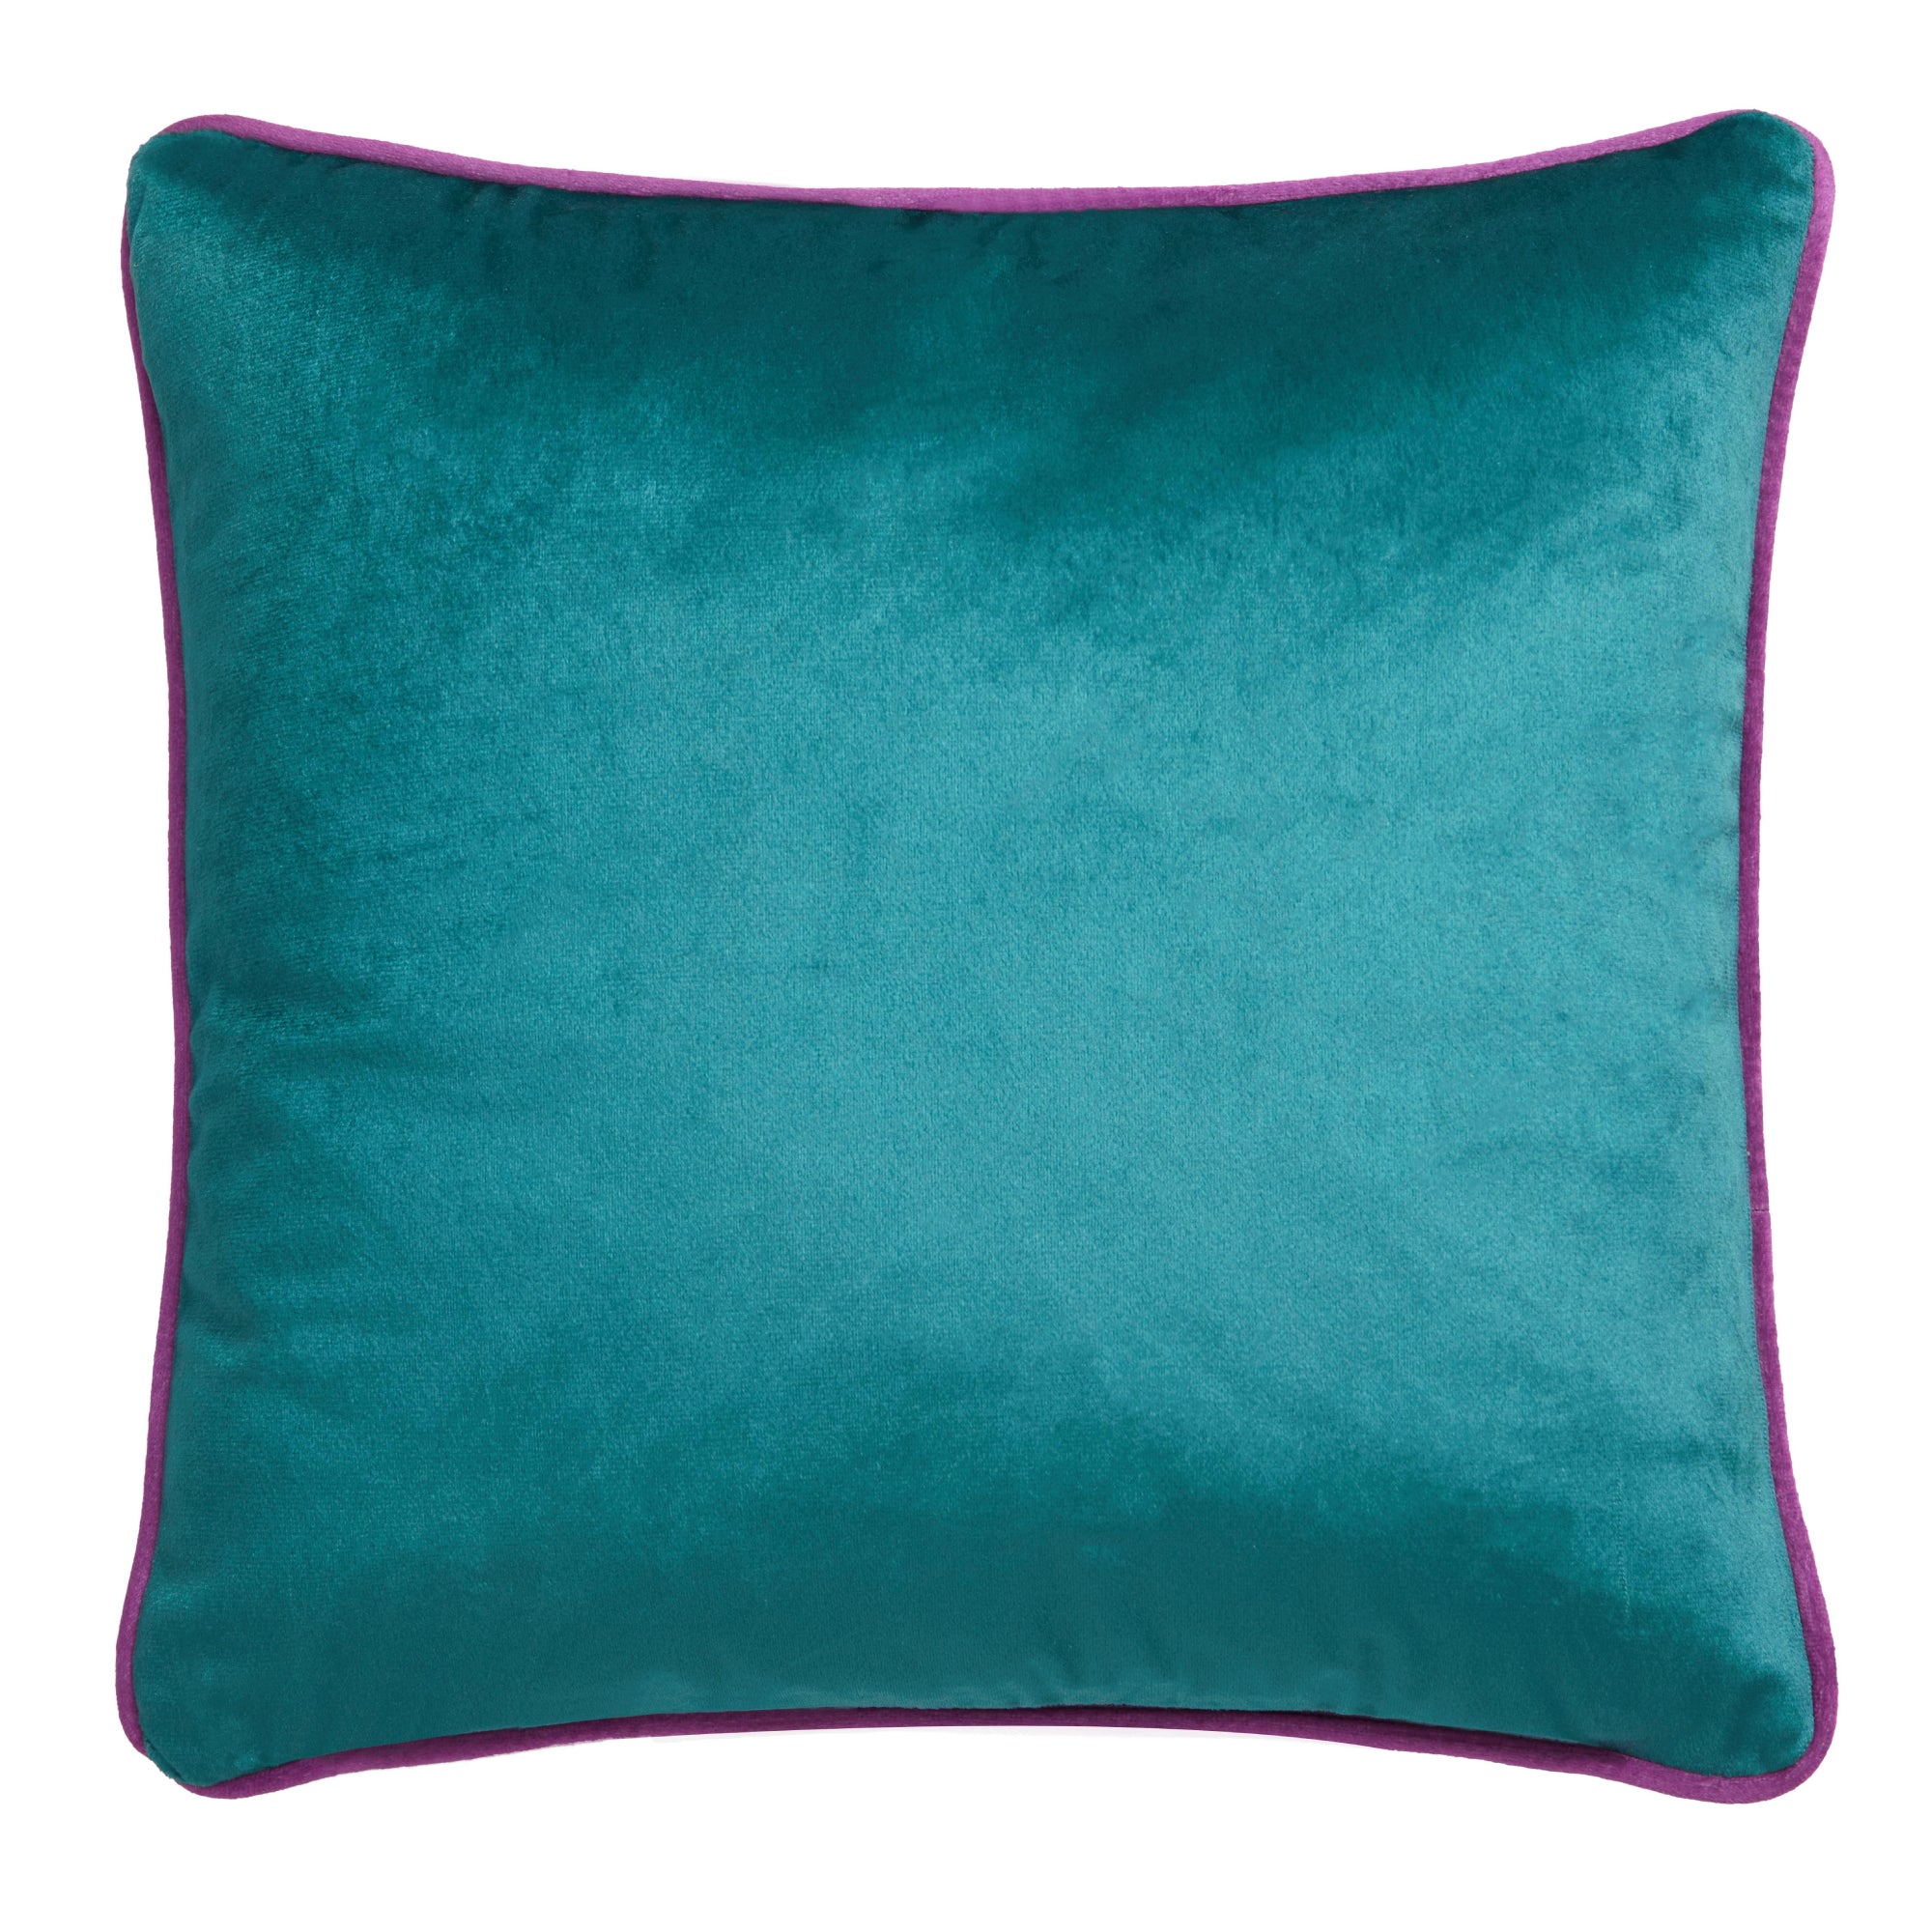 Filled Cushion Pants on Fire by Laurence Llewelyn-Bowen in Blue